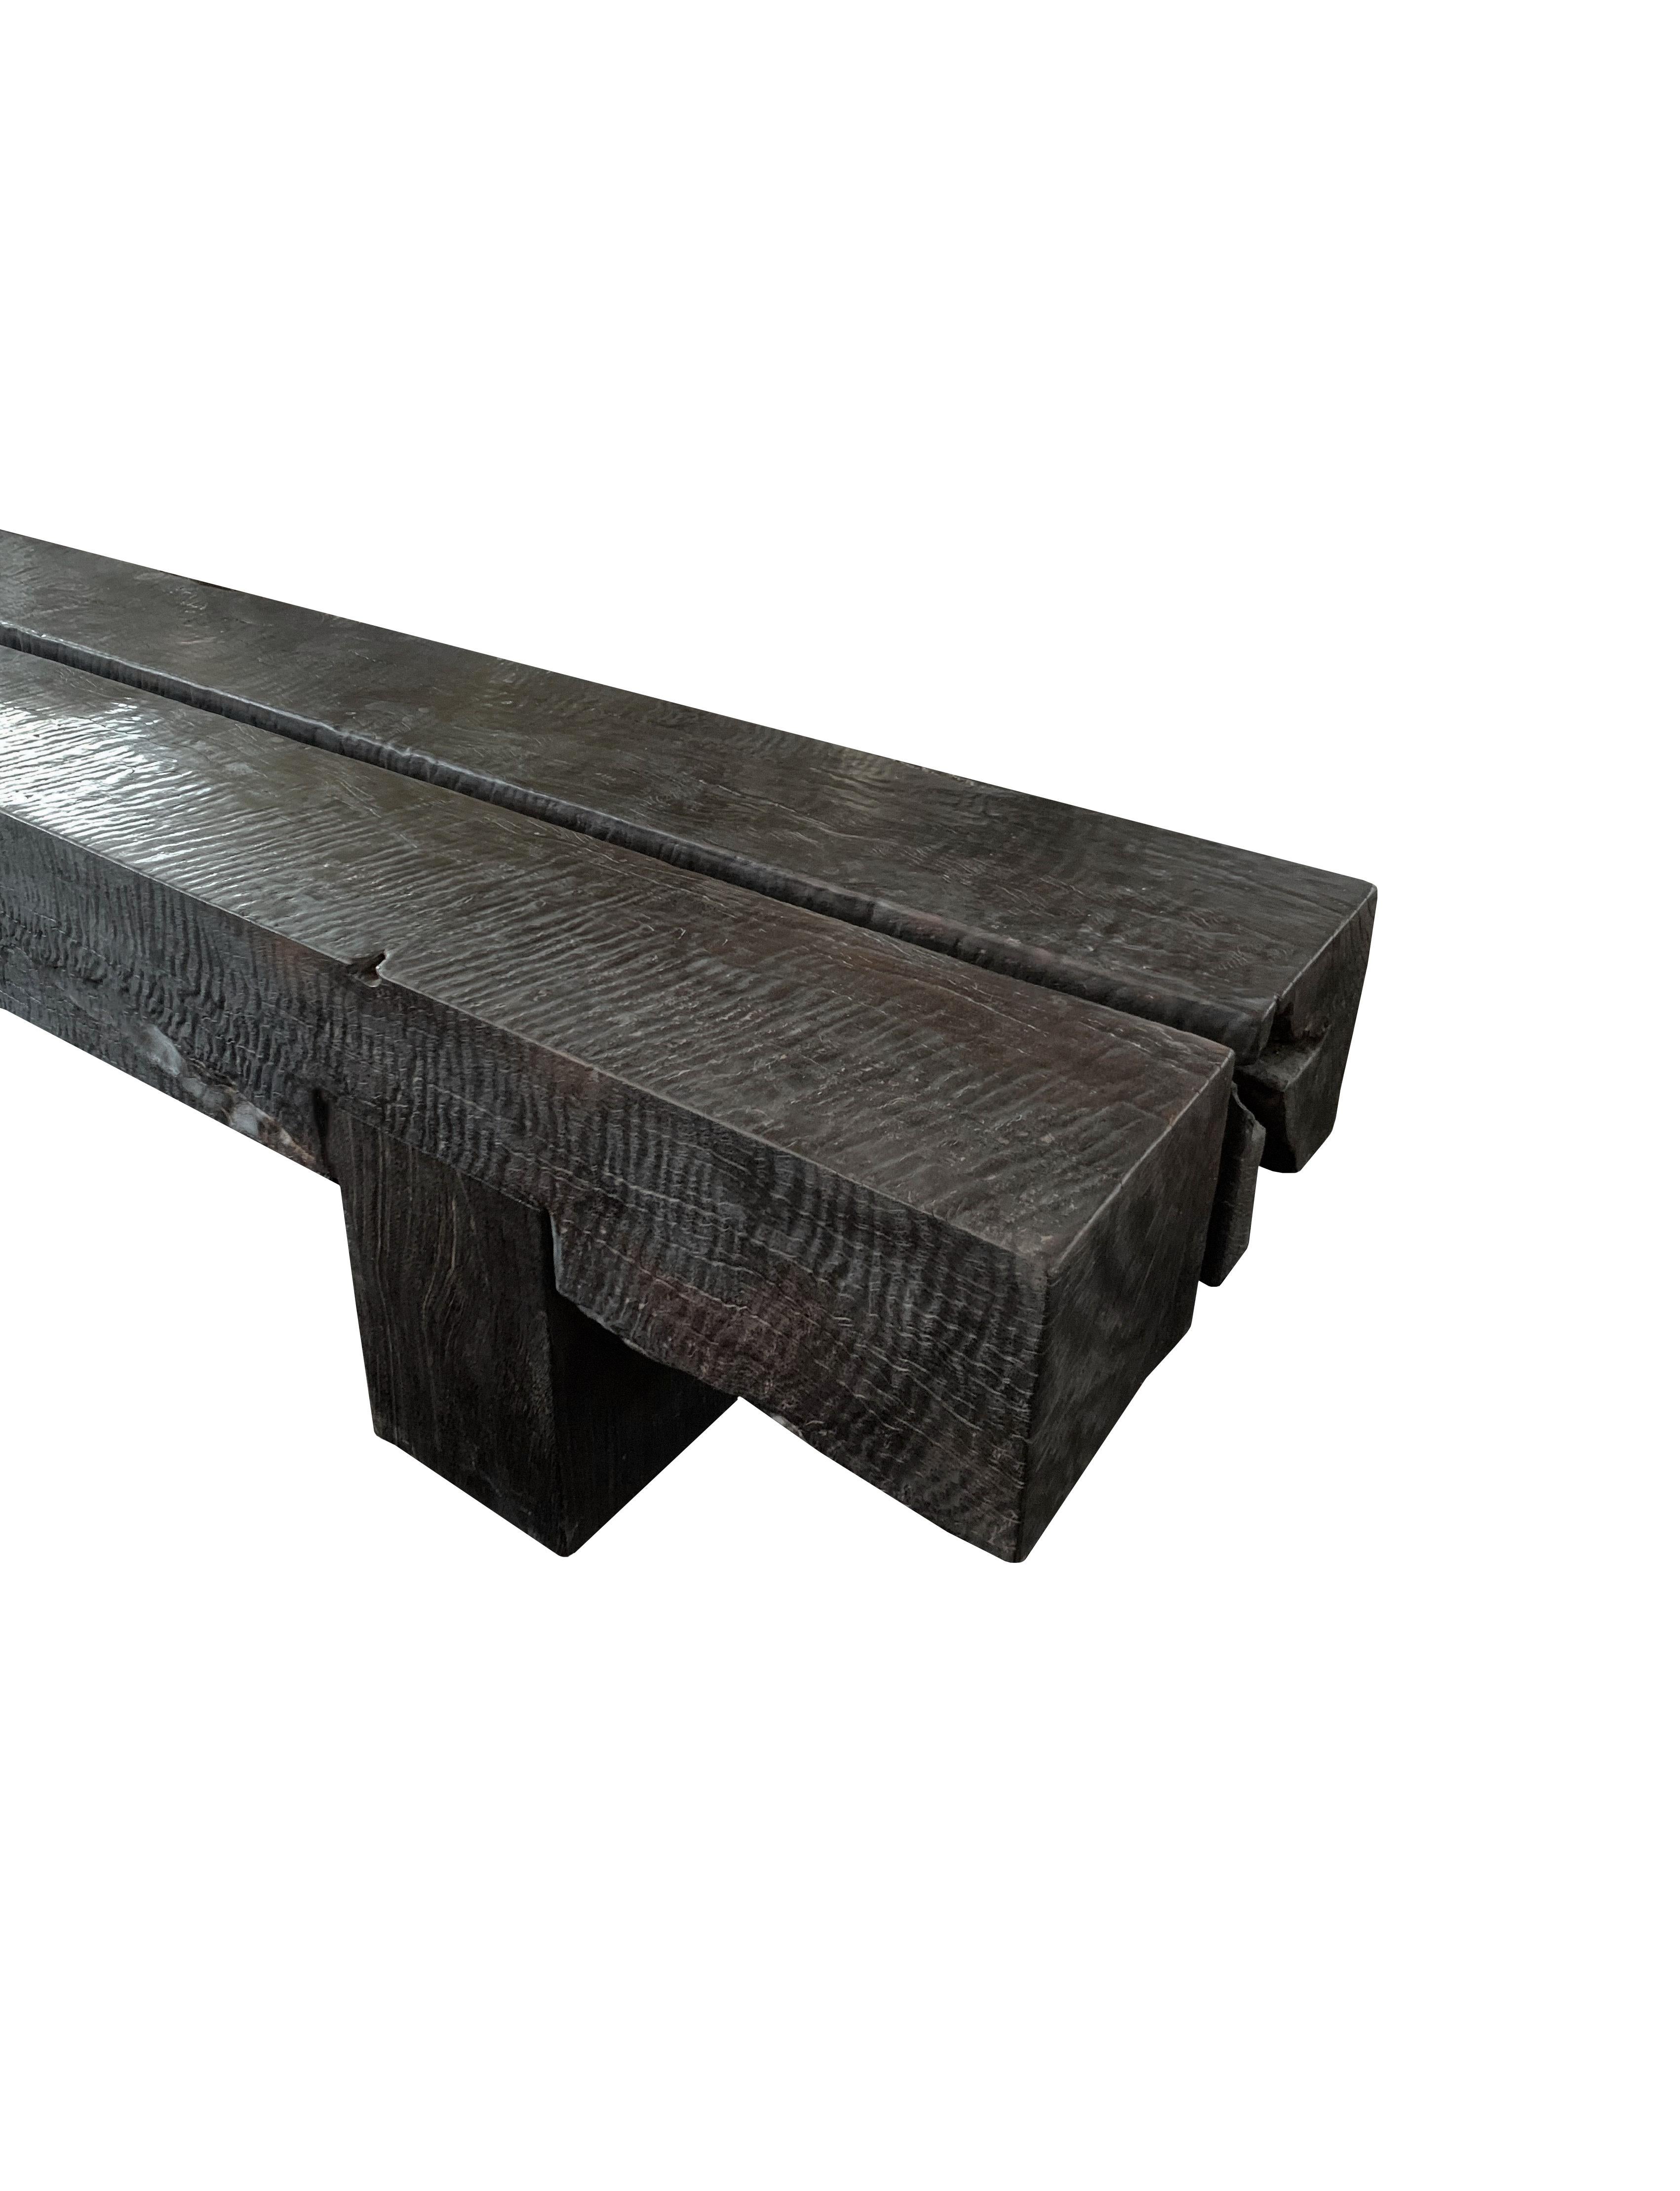 Other Sculptural Solid Mango Wood Bench with Burnt Finish Modern Organic For Sale